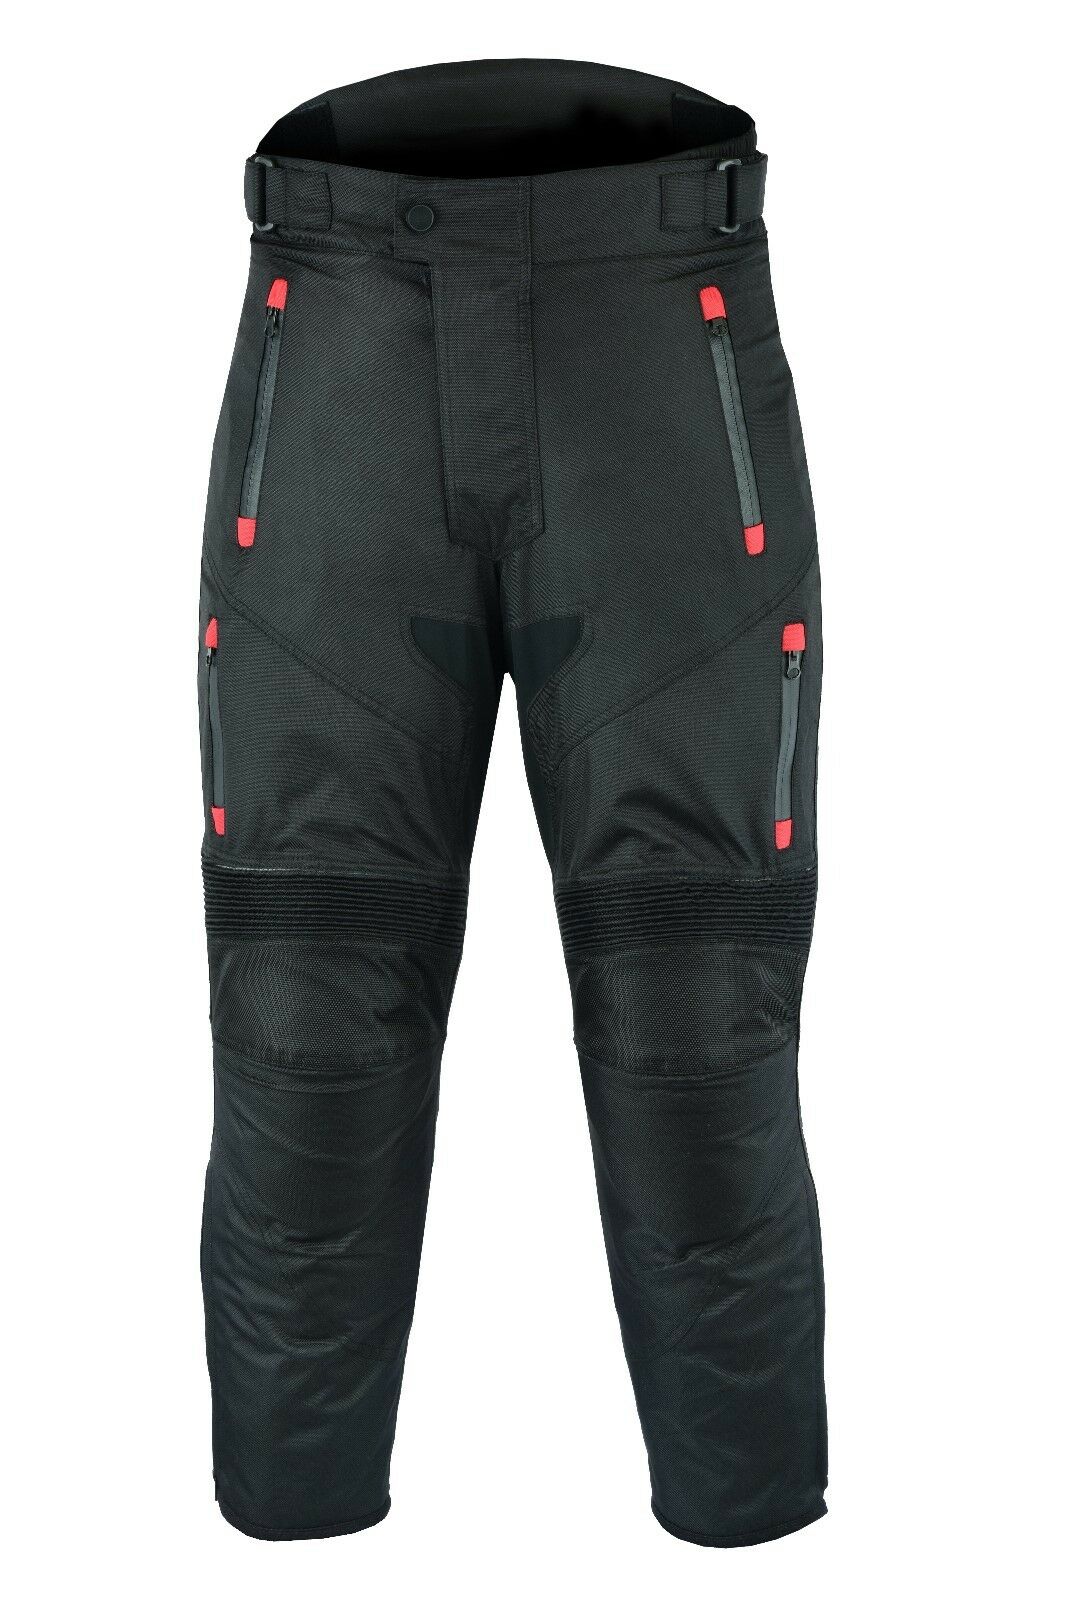 Tuzo Outback Waterproof Adventure Motorcycle Trousers | FREE UK DELIVERY |  Flexible Ways To Pay | M&P